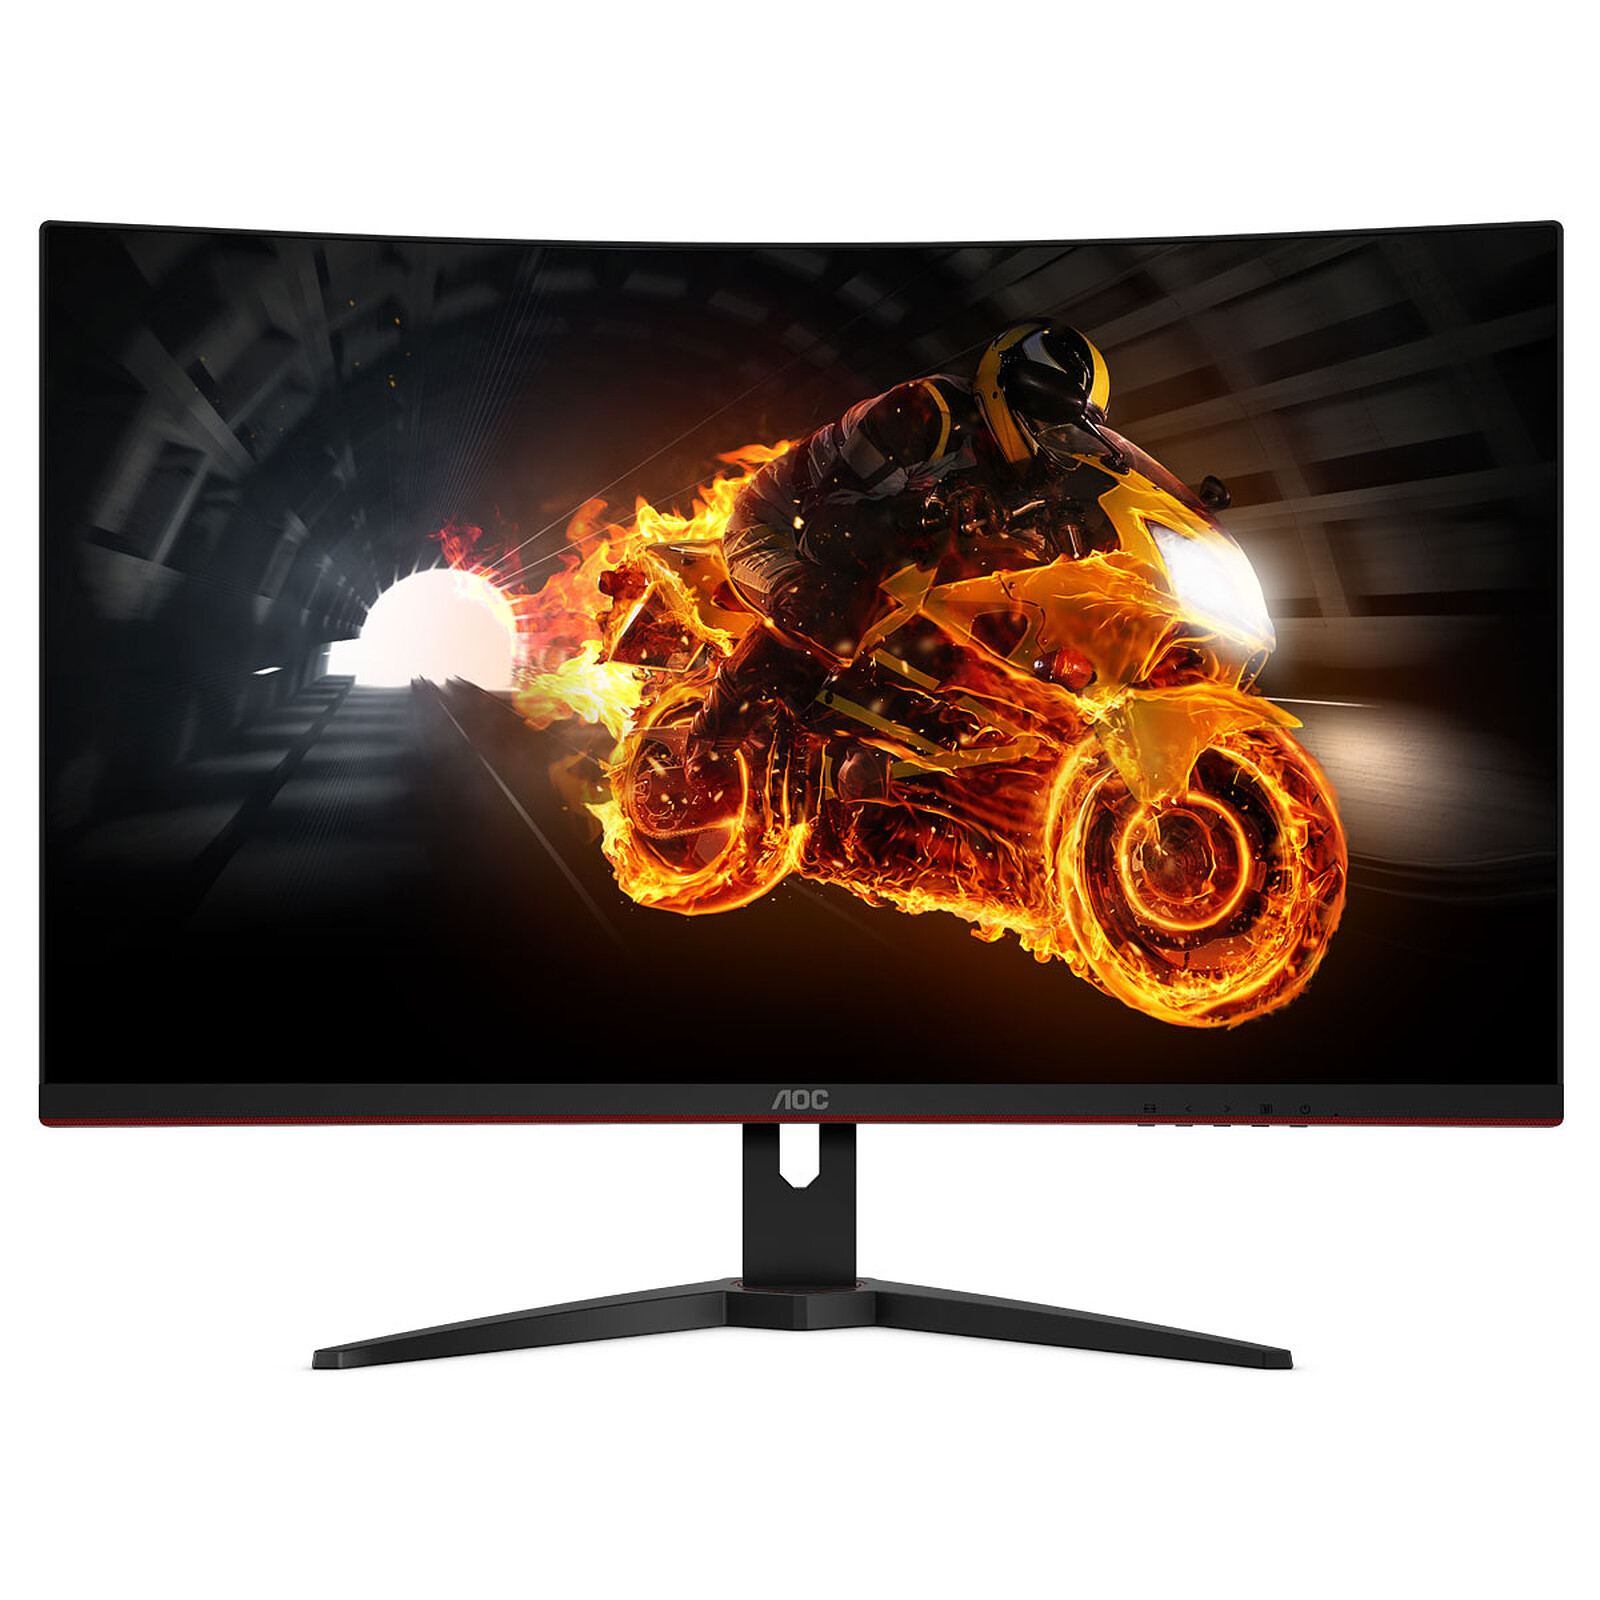 High-speed OLED monitors are pouring in with AOC announcing €999